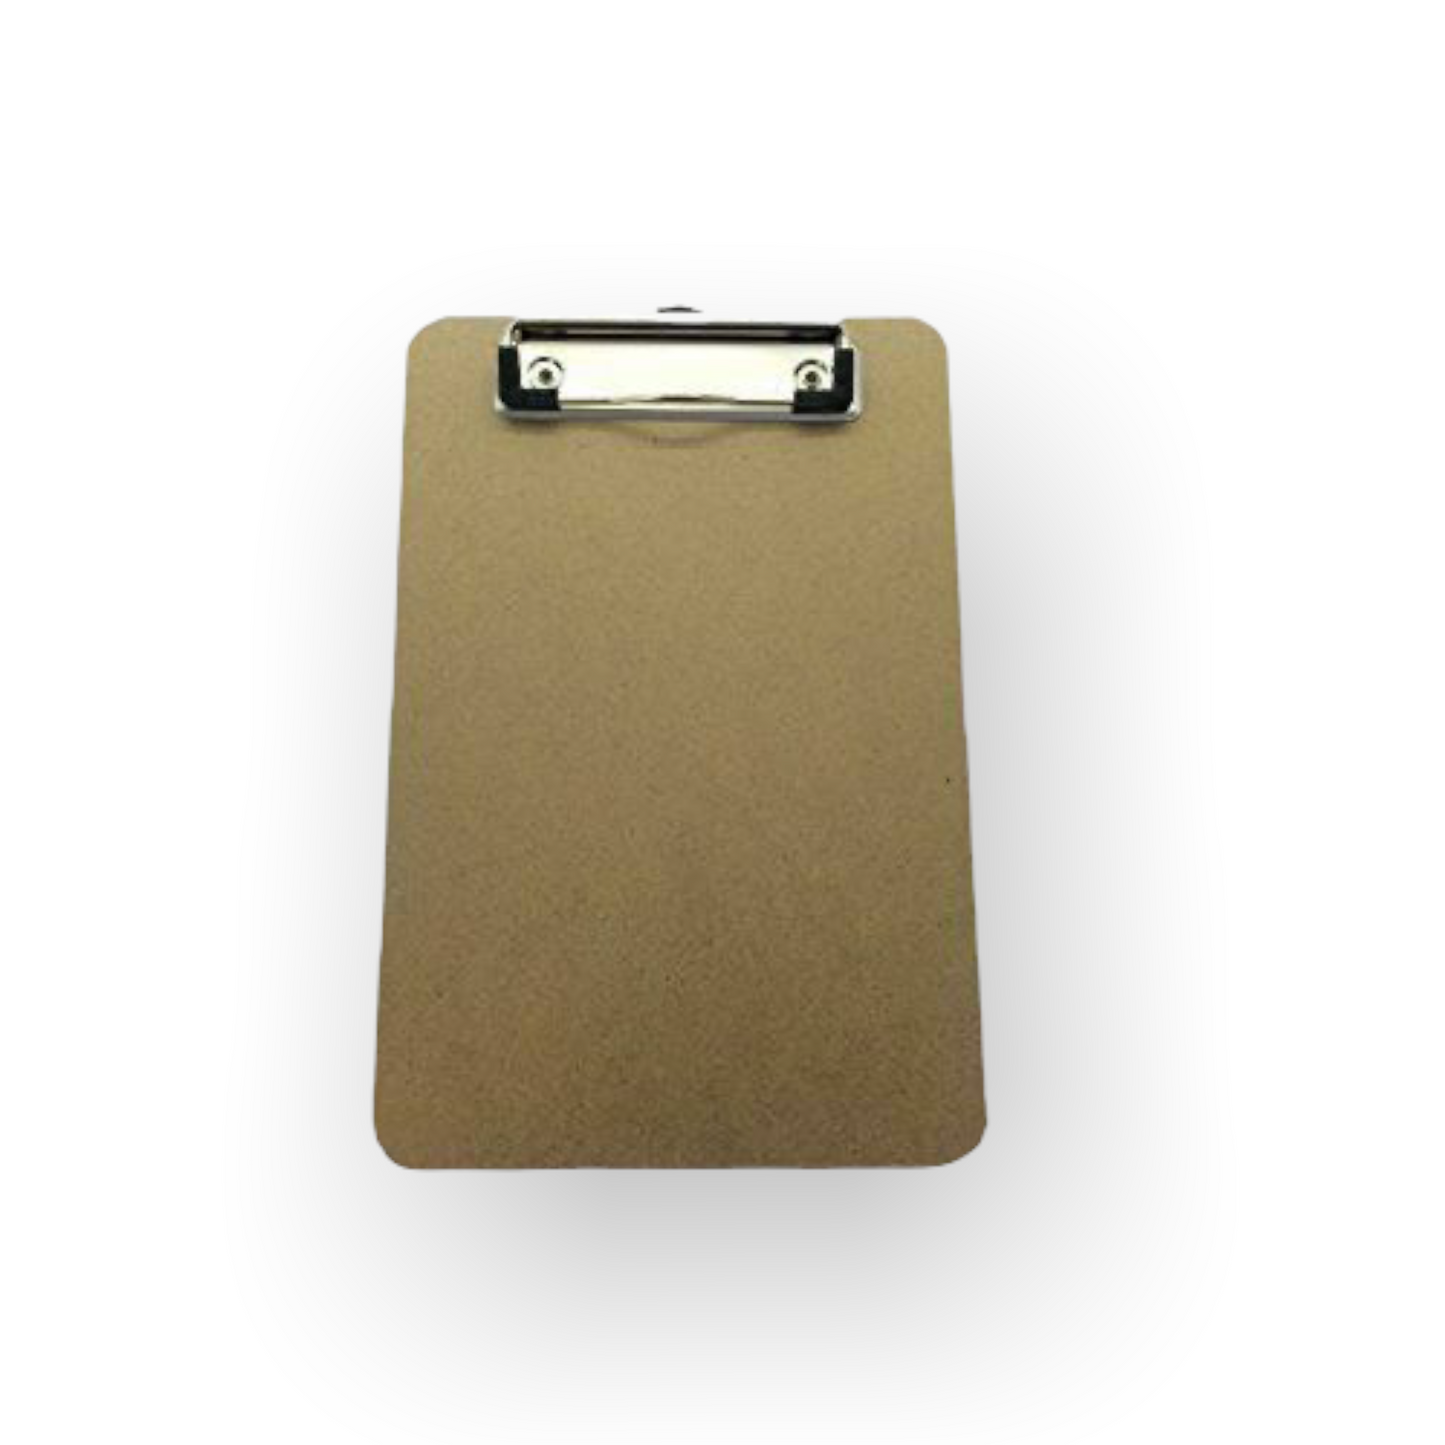 Pack of 12 A5 Quality Wooden Clipboards with Hanging Hole